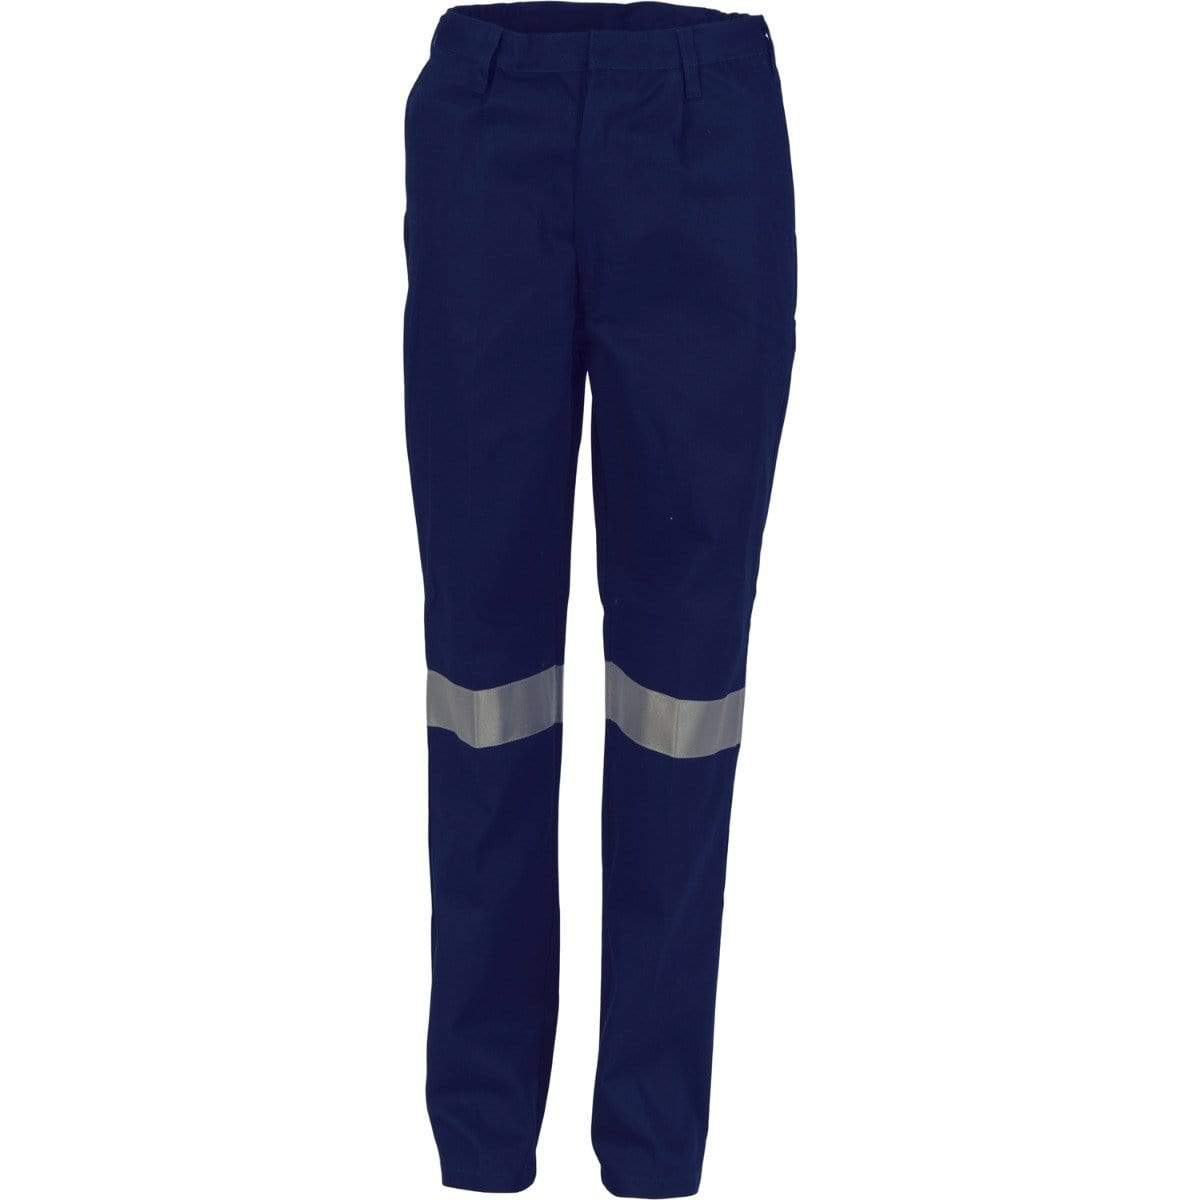 Dnc Workwear Ladies Cotton Drill Pants With 3m Reflective Tape - 3328 Work Wear DNC Workwear Navy 6 